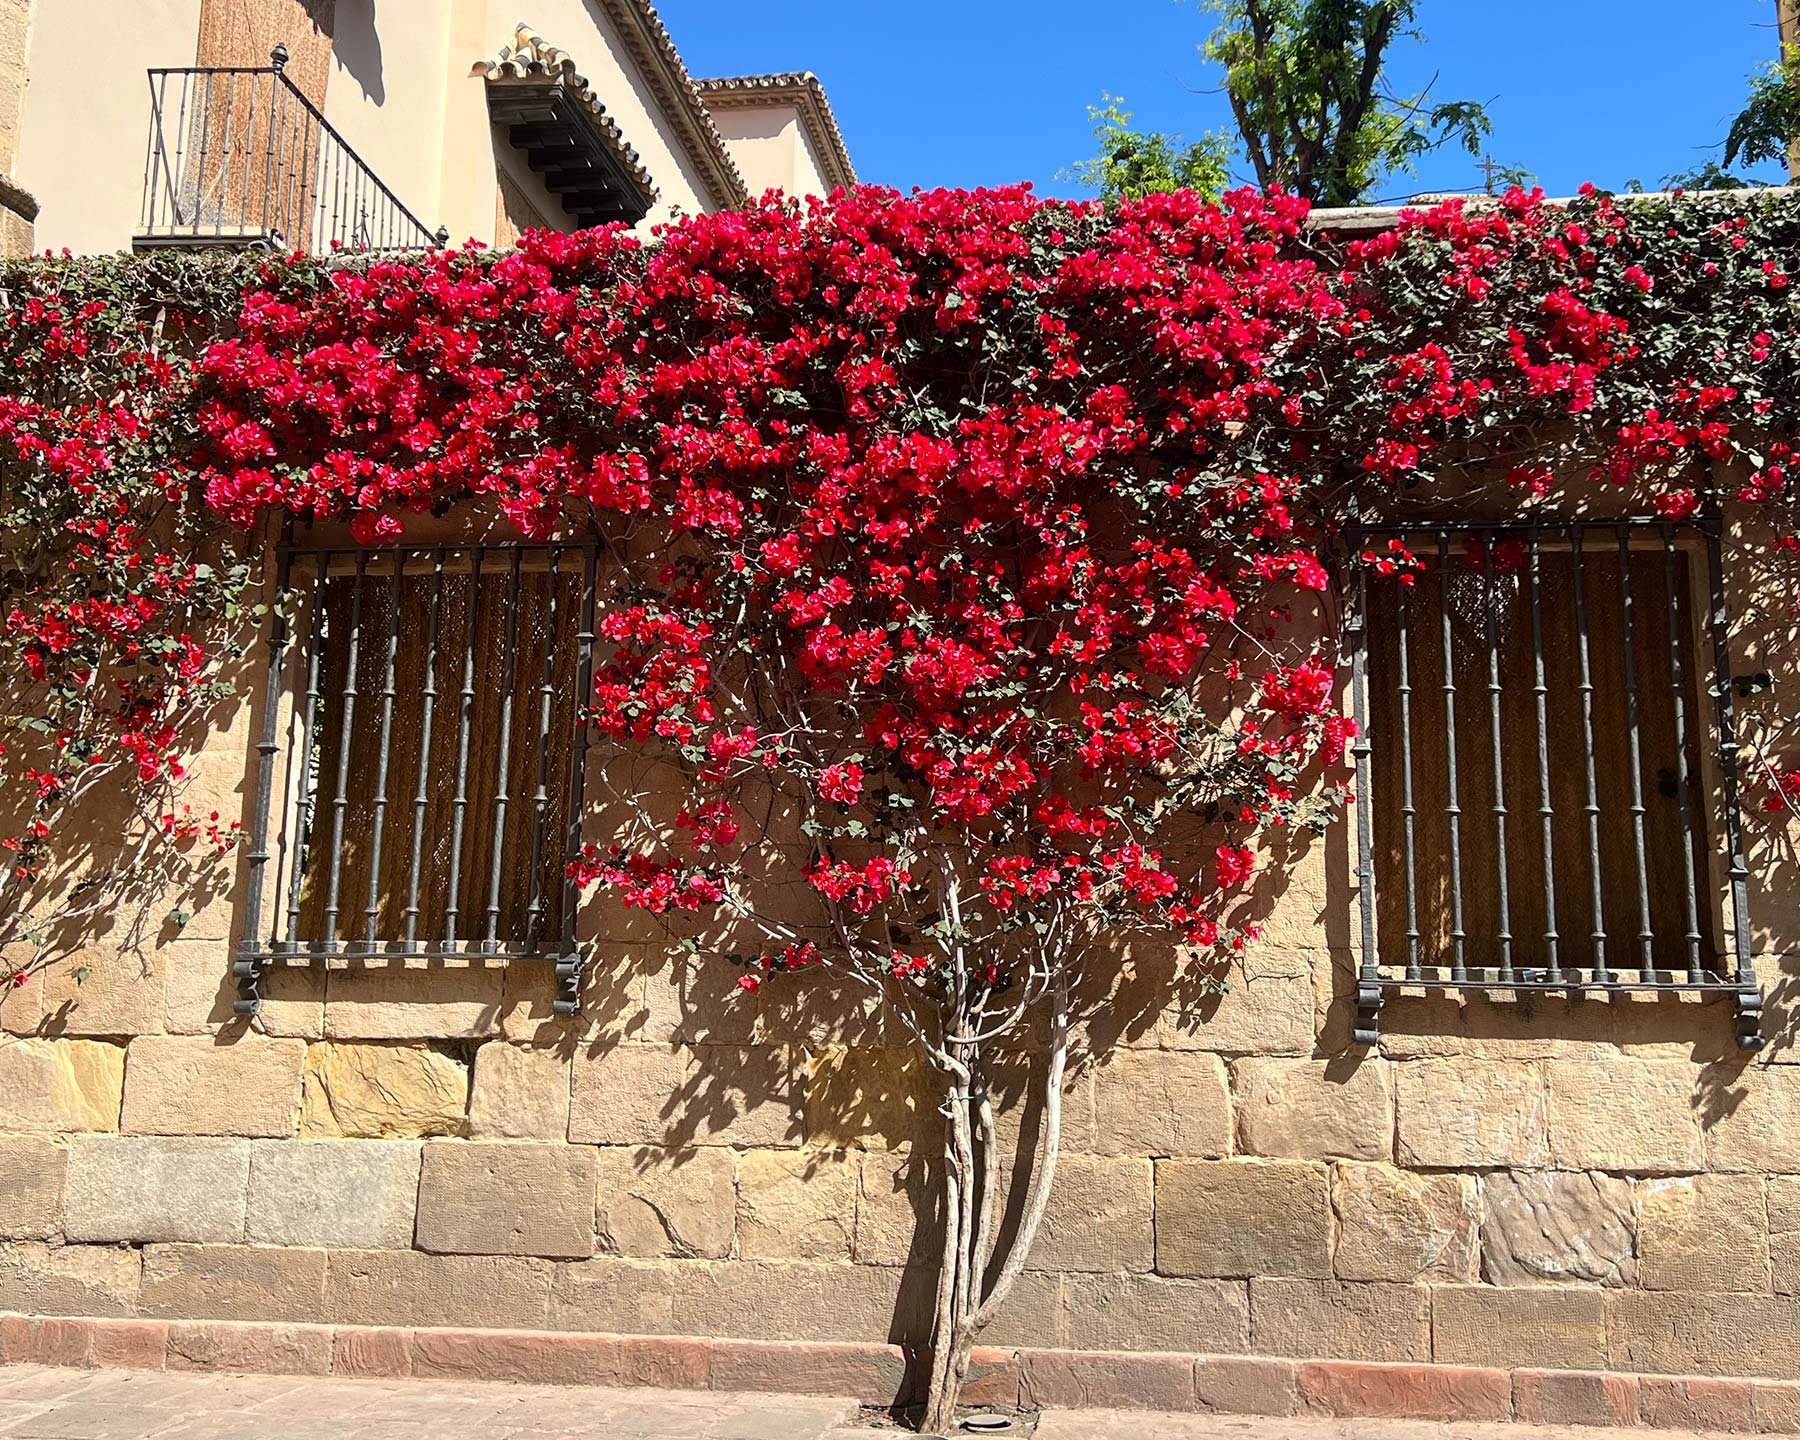 Bougainvillea,  deep red bracts add colour to wall in Malaga, Spain